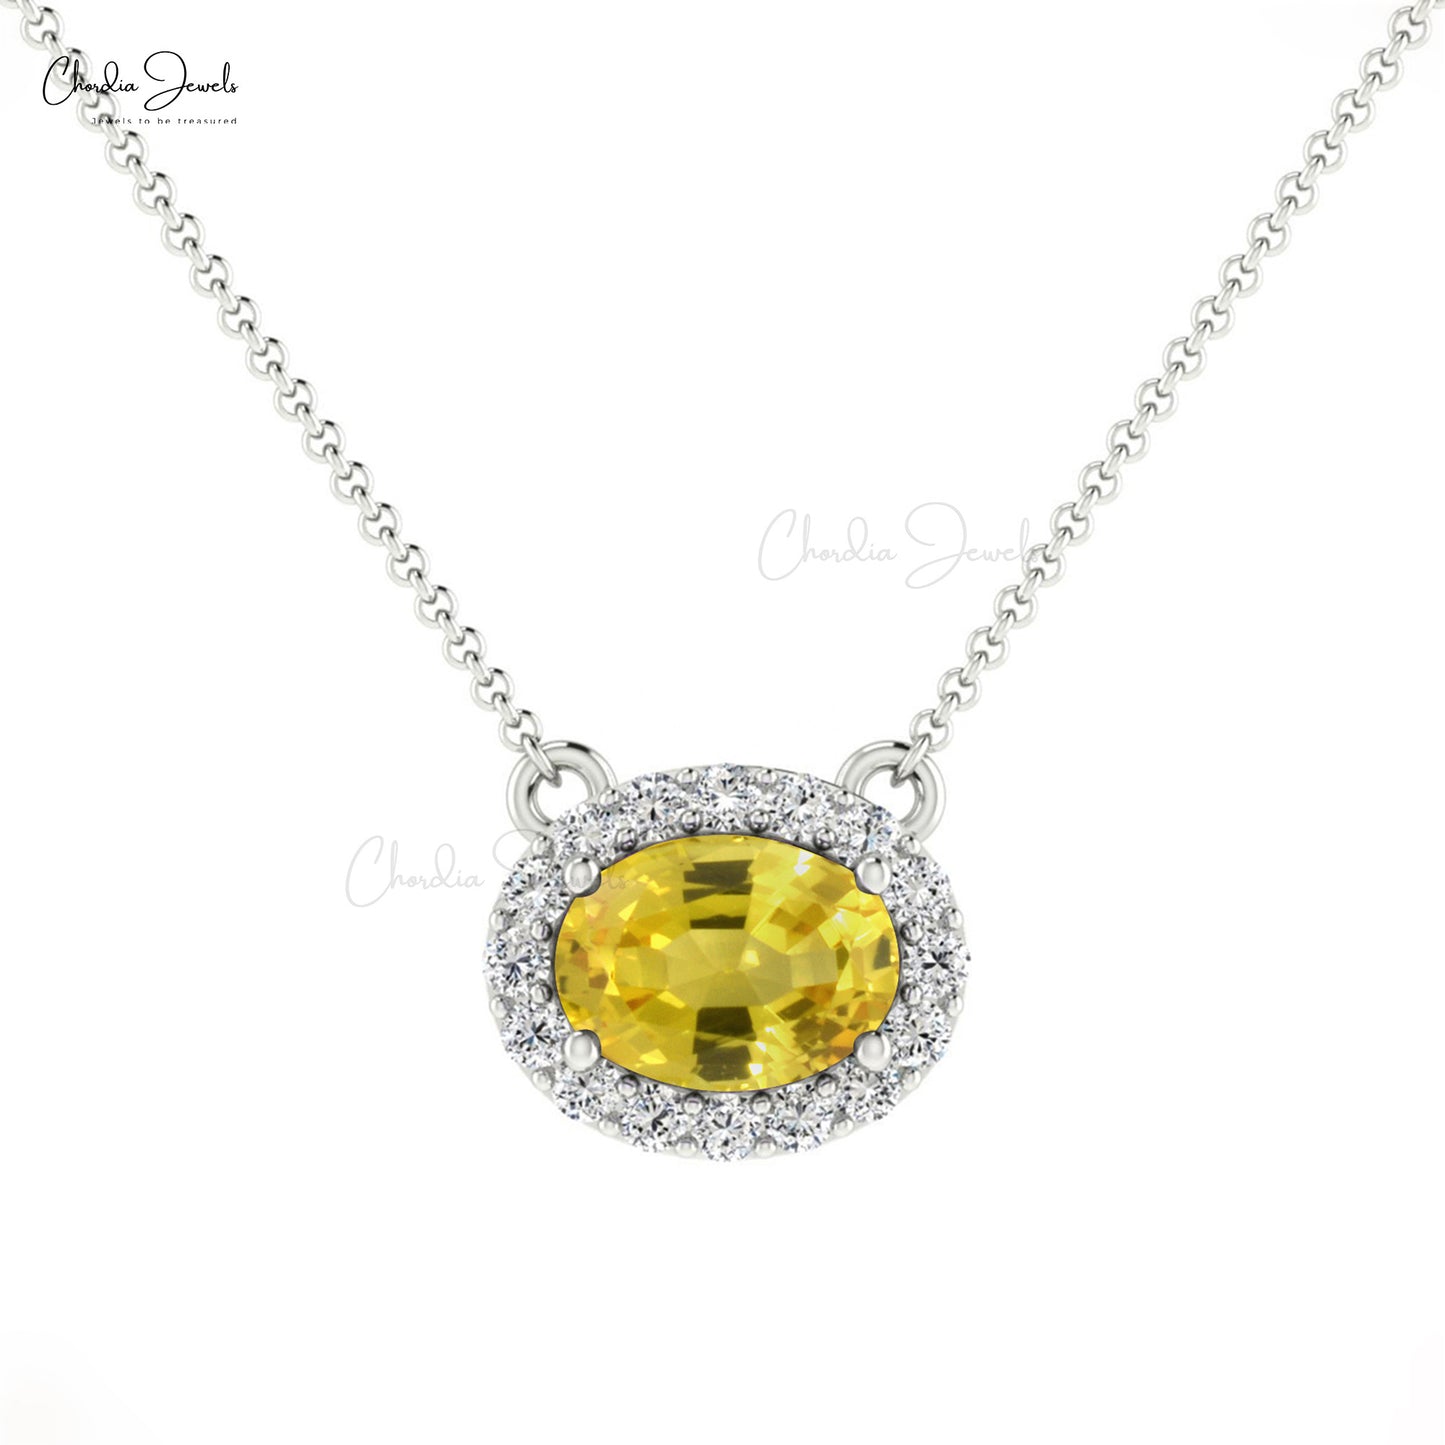 Load image into Gallery viewer, 7x5mm Oval Faceted Gemstone Necklace, 14k Solid Gold Diamond Necklace, Natural Yellow Sapphire Necklace, Bridesmaid Necklace, Handmade Necklace, Gift for Her
